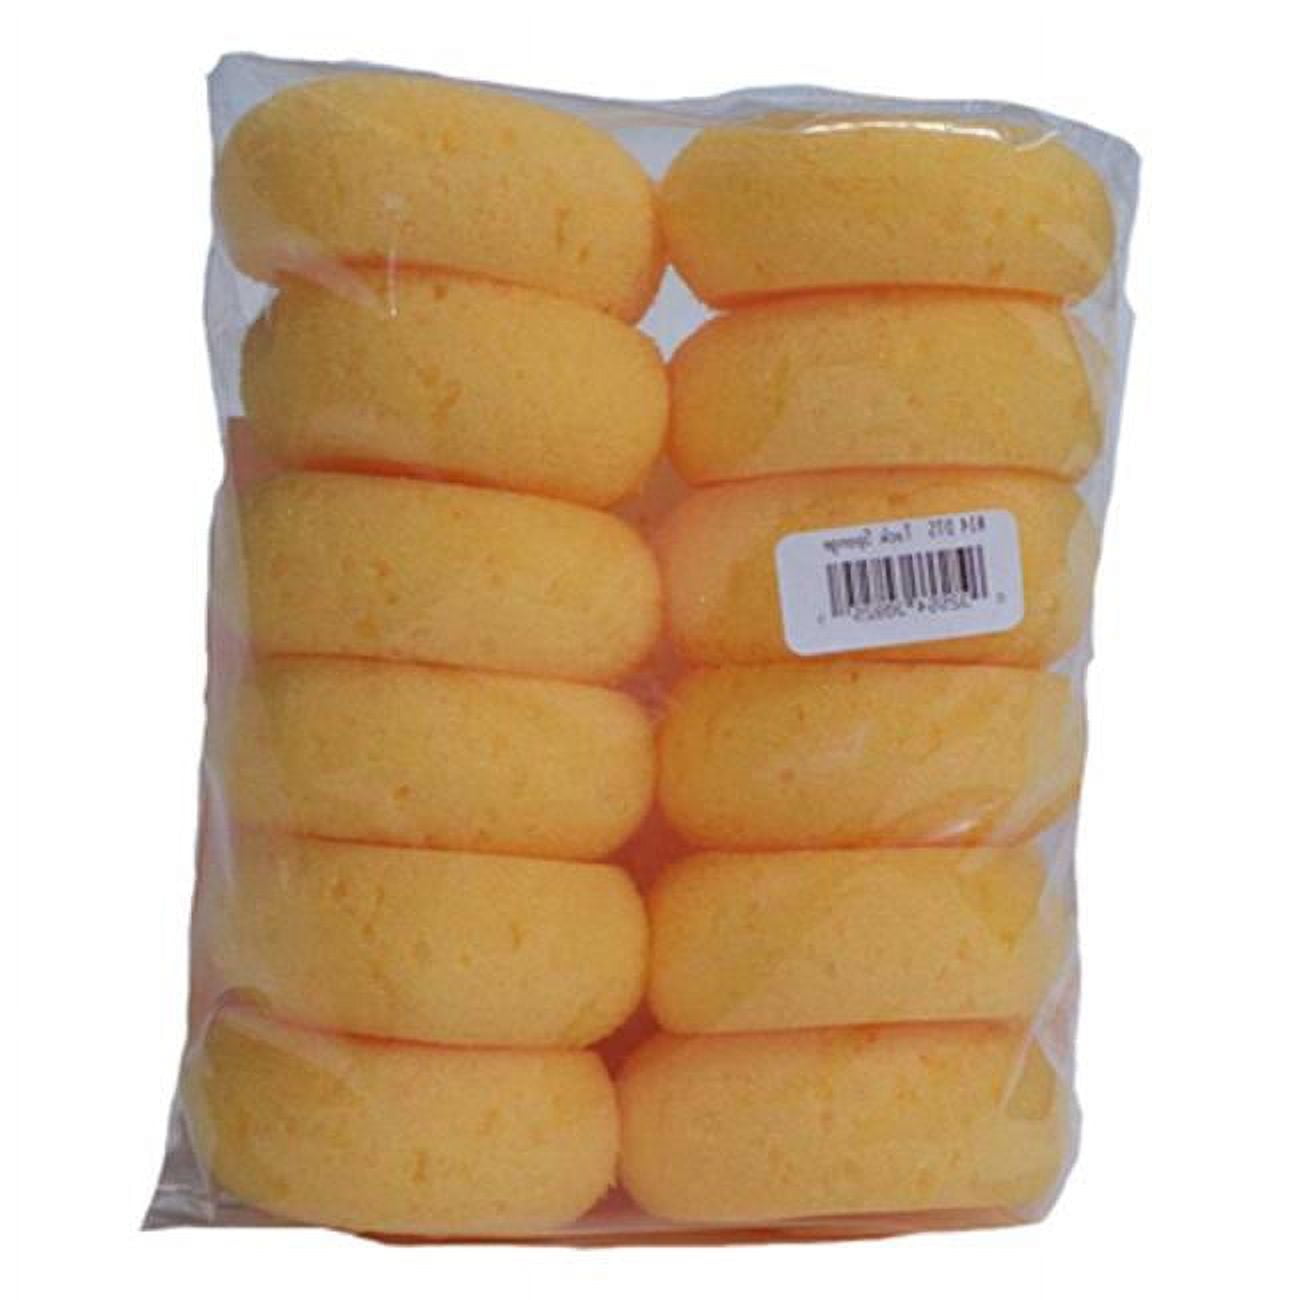 24 Pcs Sponges for Dishes, Non-Scratch Scrub Sponges with Abrasive Scour  Pads, 3.94Inch x 2.8Inch x 1.2Inch Dual-Sided Dish Sponges for Washing  Dishes or Home Kitchen Cleaning 